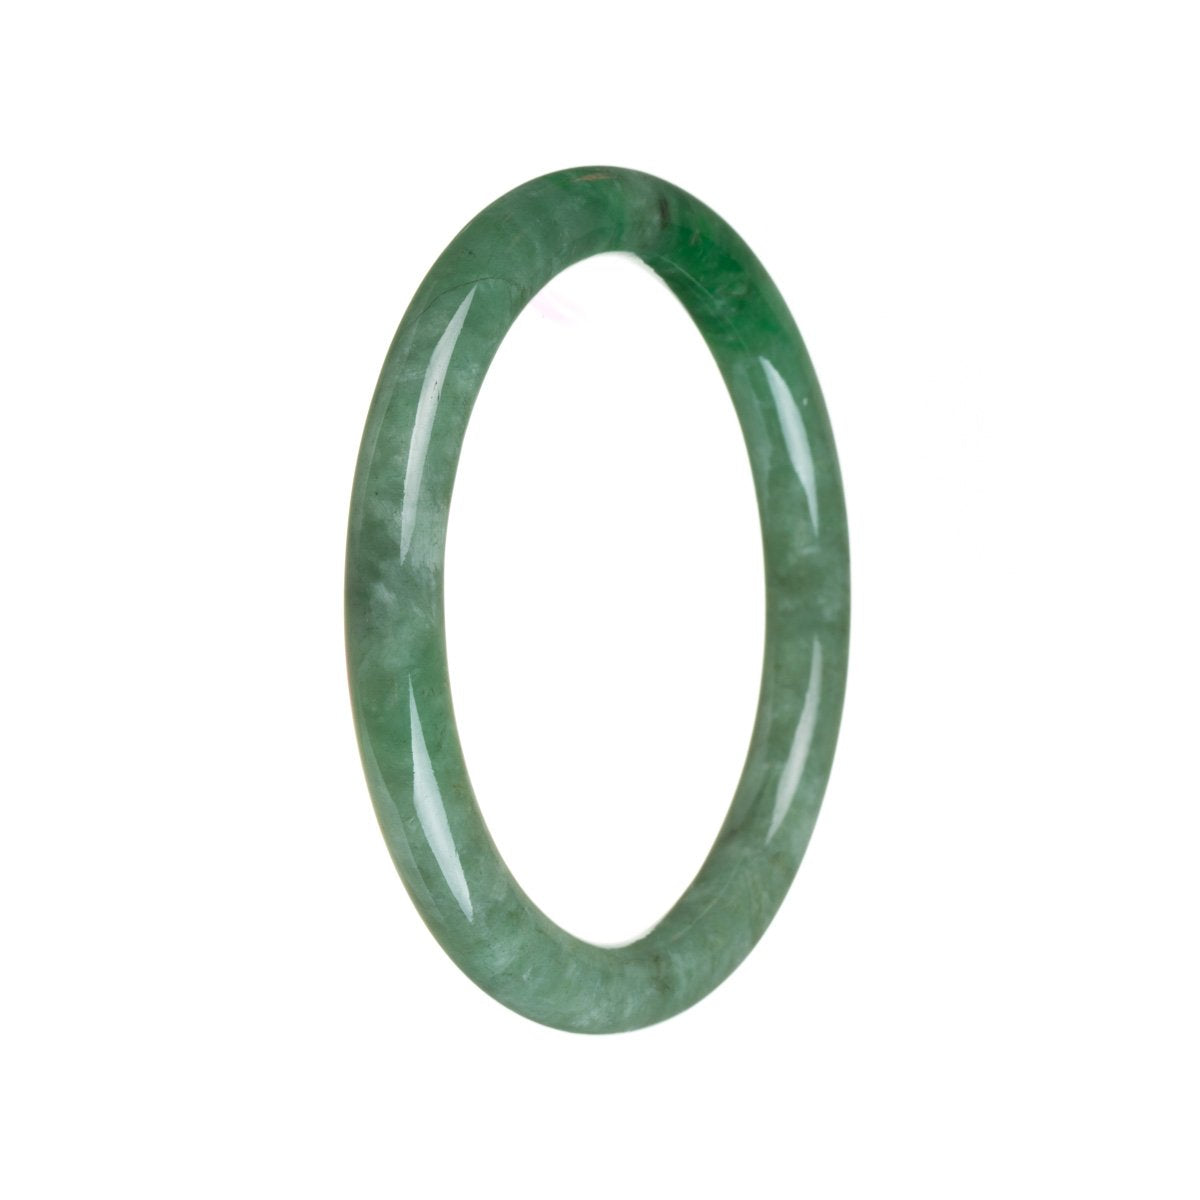 A close-up image of a beautiful green jade bangle bracelet with a petite round shape. The bangle is made of genuine Grade A green imperial green jadeite jade, showcasing its exquisite craftsmanship. This elegant piece of jewelry is offered by MAYS.